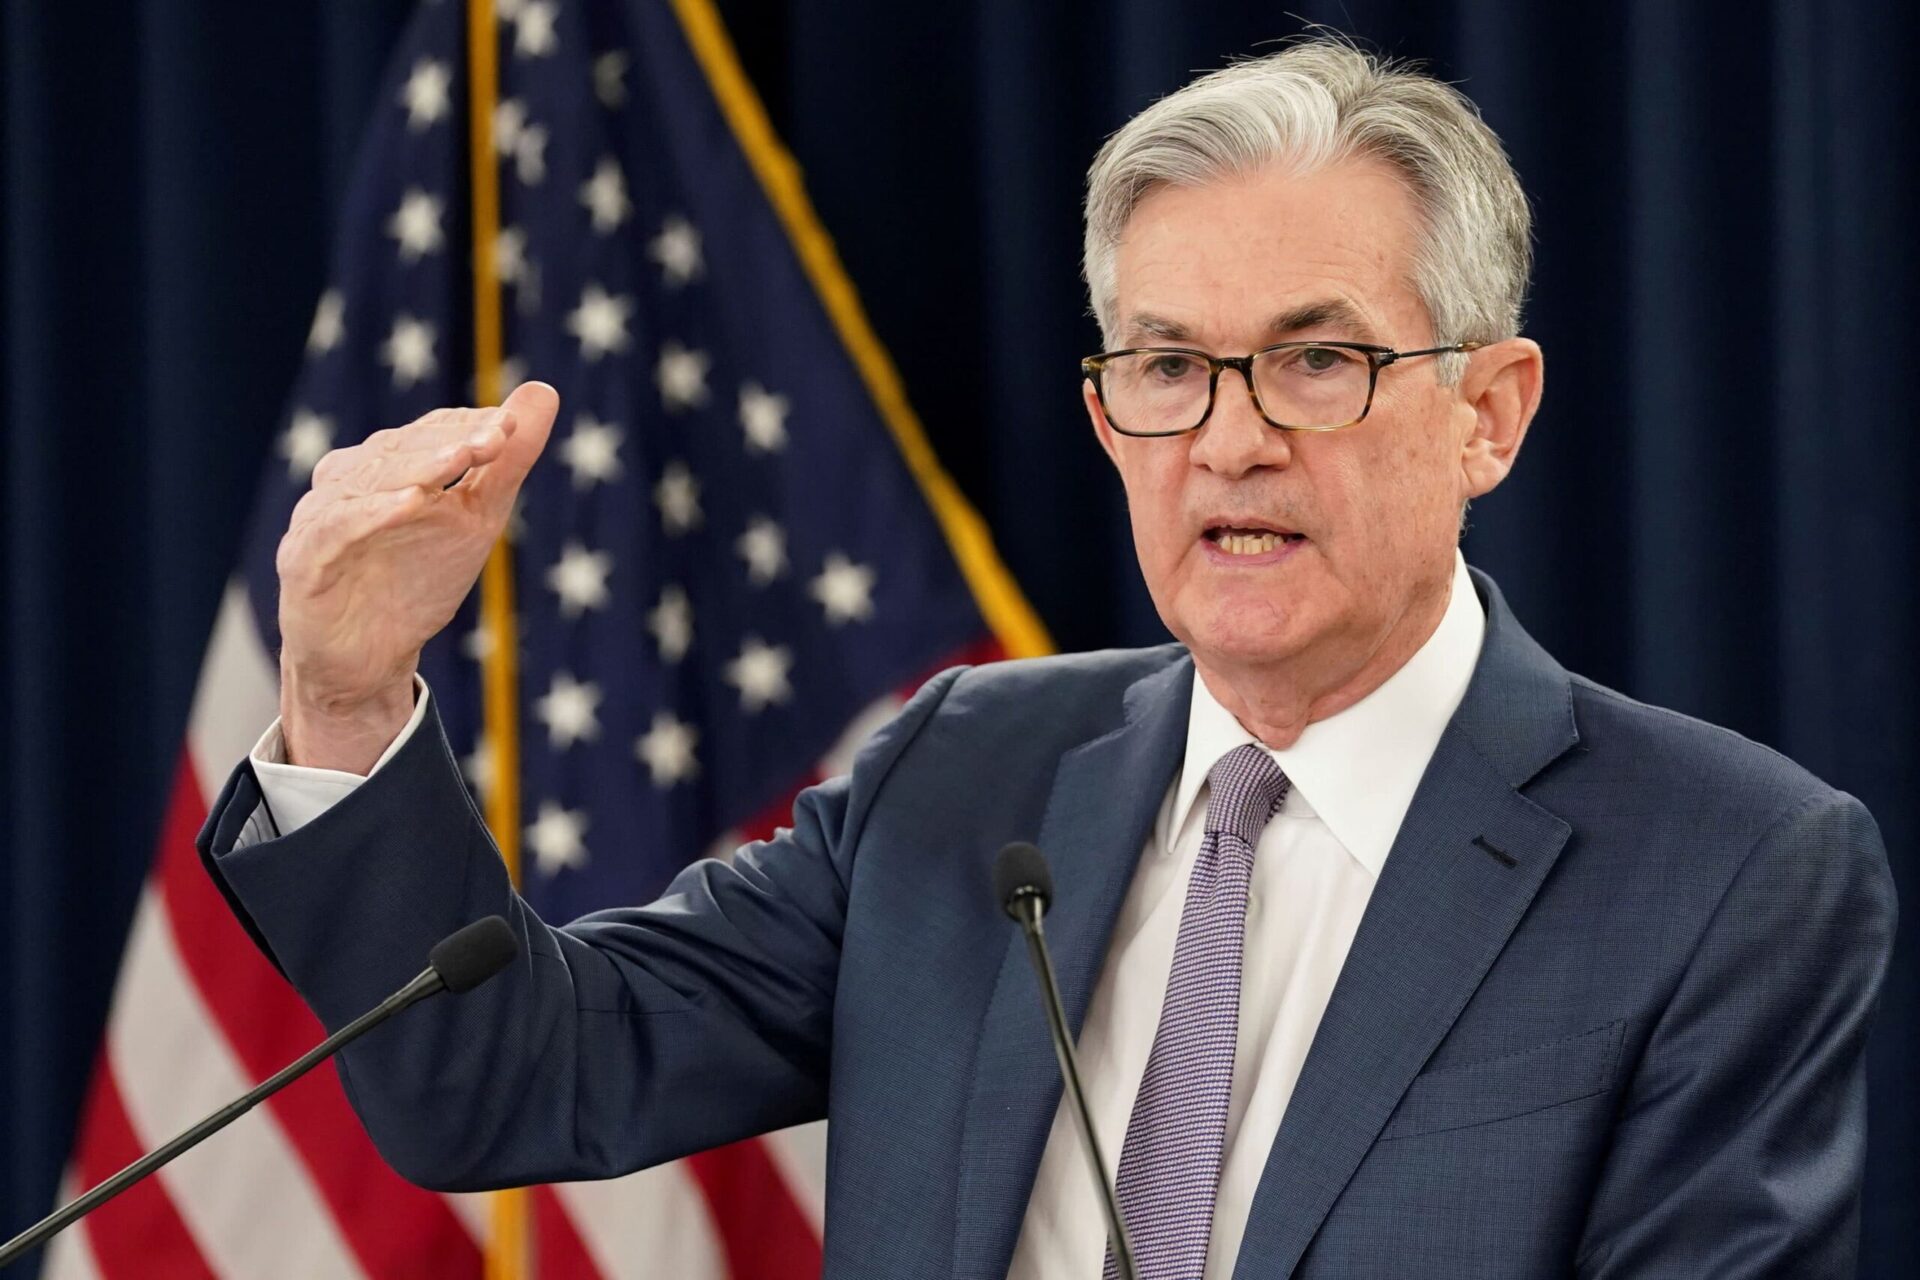 Powell On Inflation: “We Will Stay The Course Until The Job Is Done”